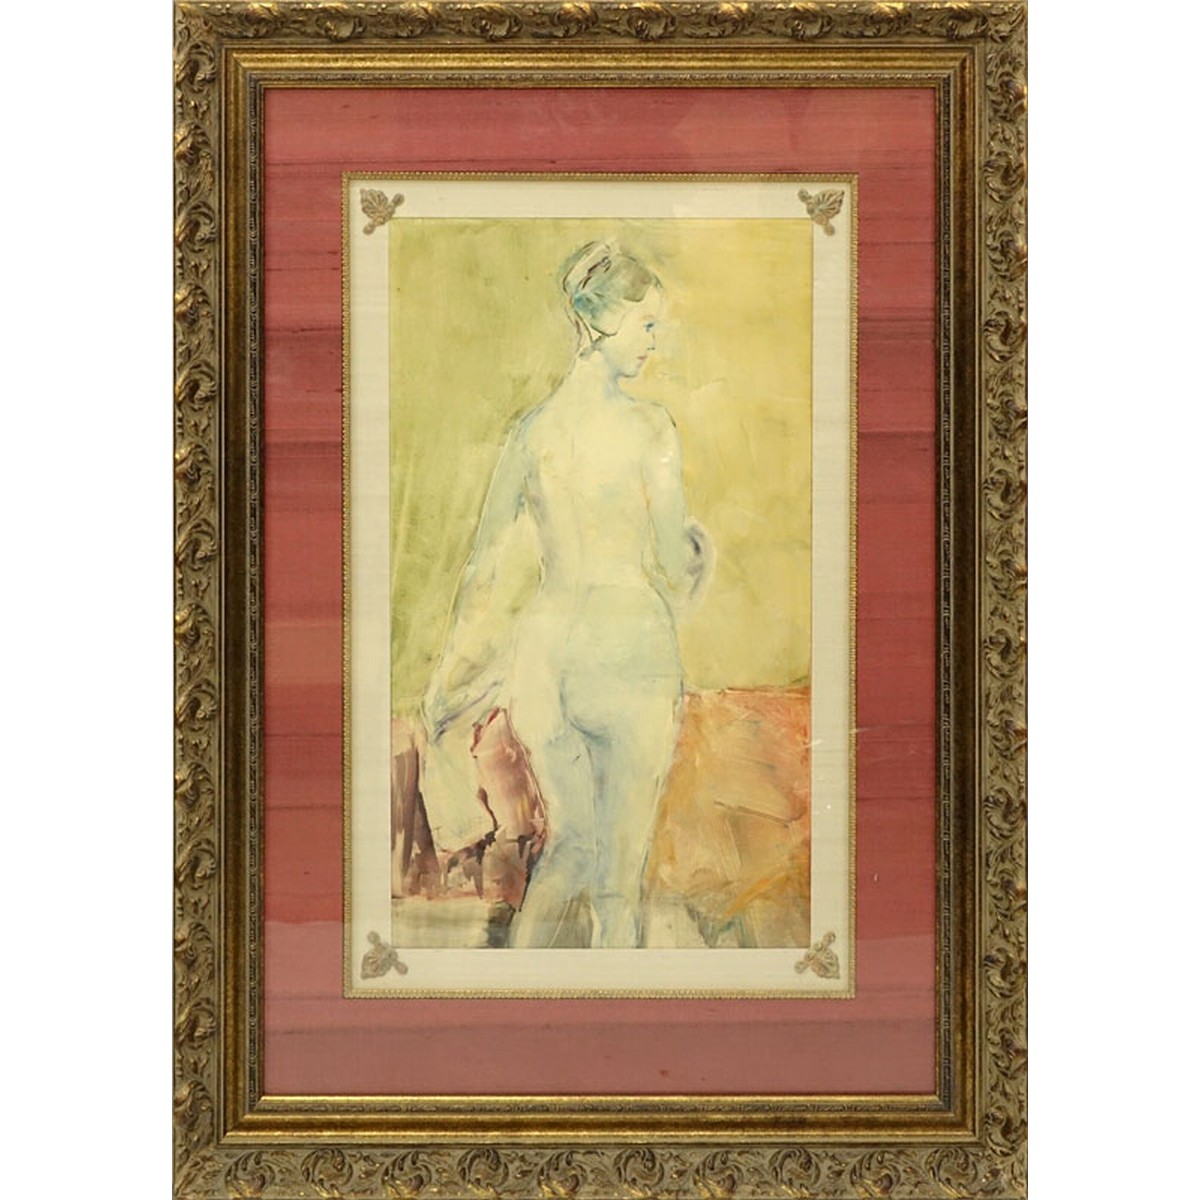 Large Modern Watercolor on Paper, Nude in Interior Scene, Unsigned. Good condition.